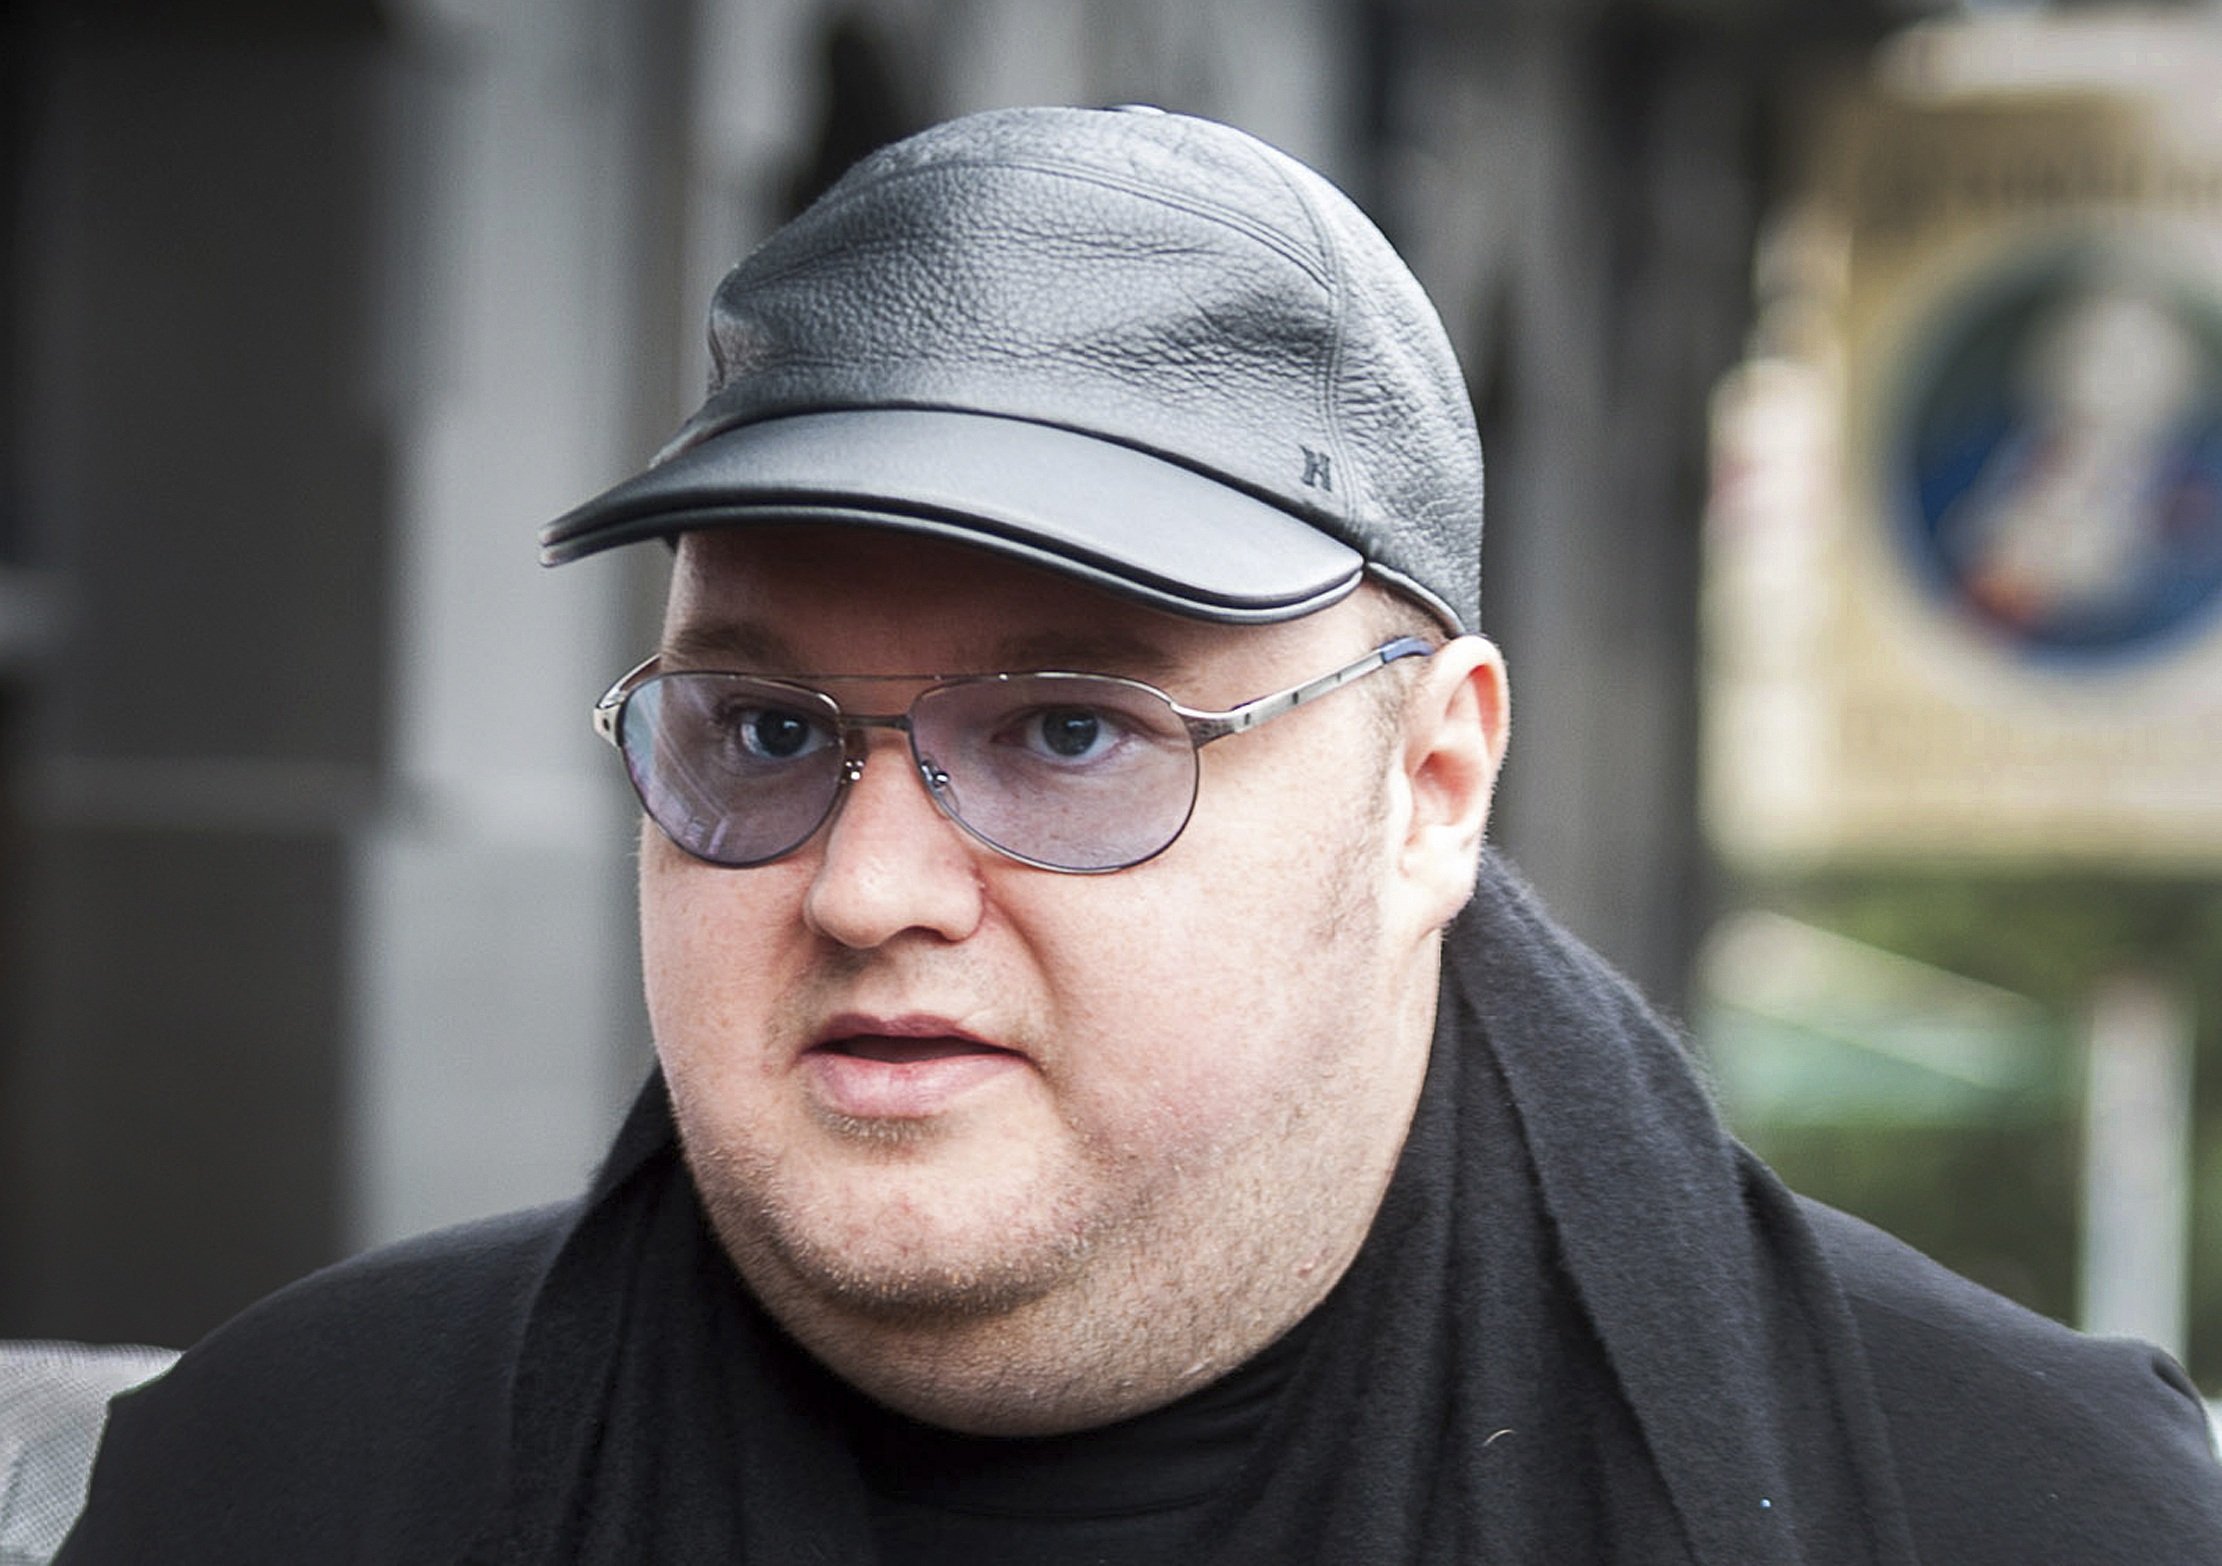 Megaupload founder Kim Dotcom at the New Zealand Court of Appeals in Wellington, on this Sept. 20, 2012.